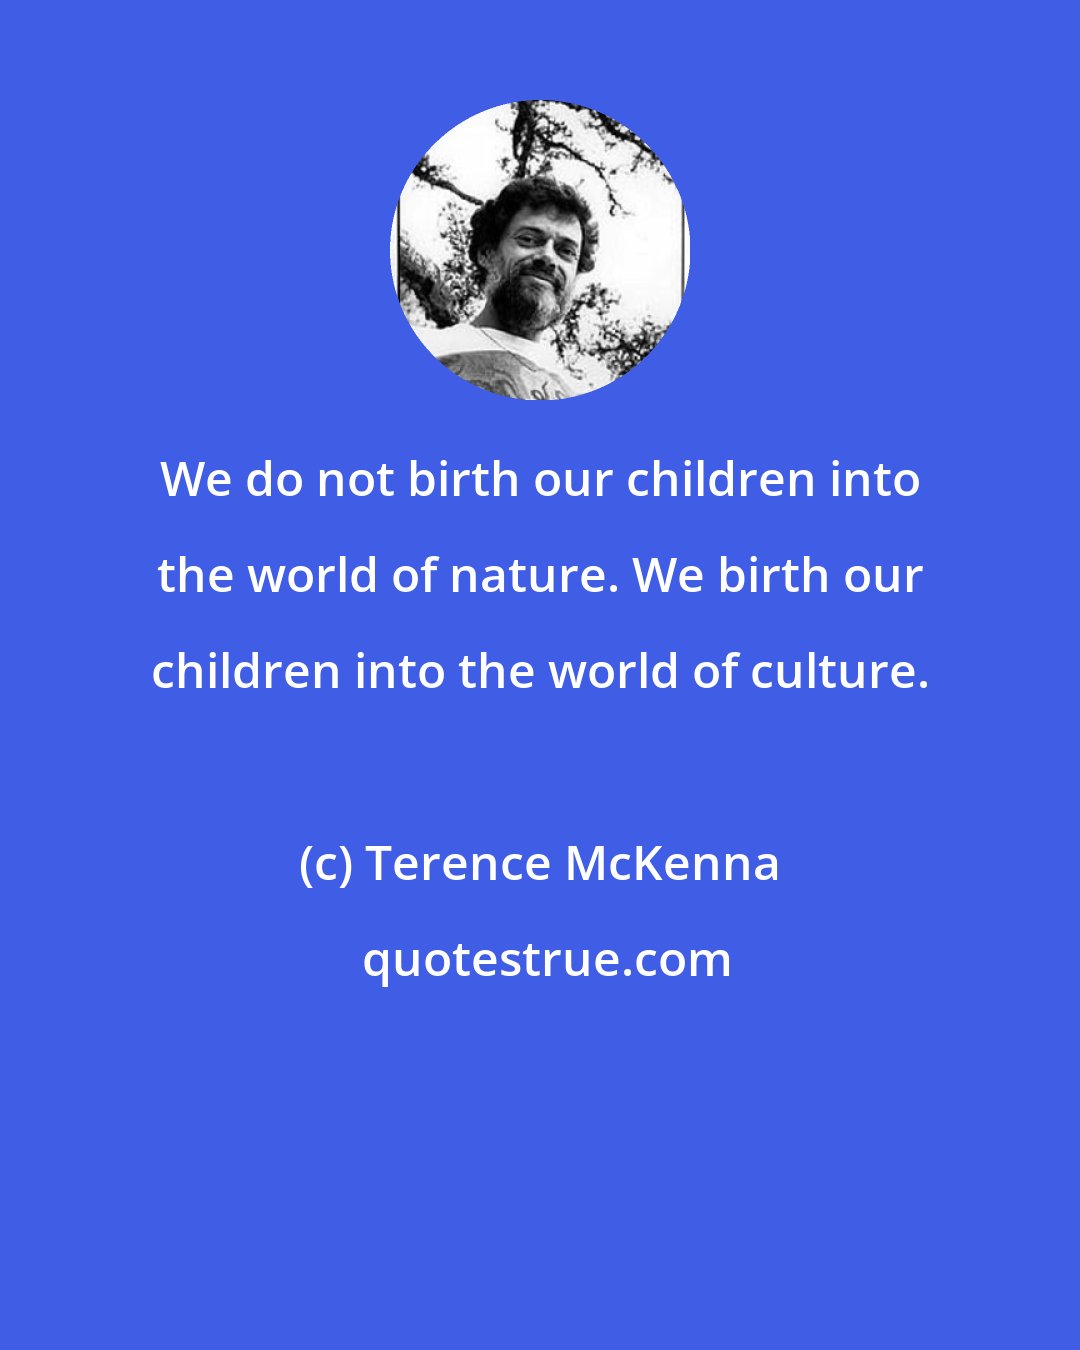 Terence McKenna: We do not birth our children into the world of nature. We birth our children into the world of culture.